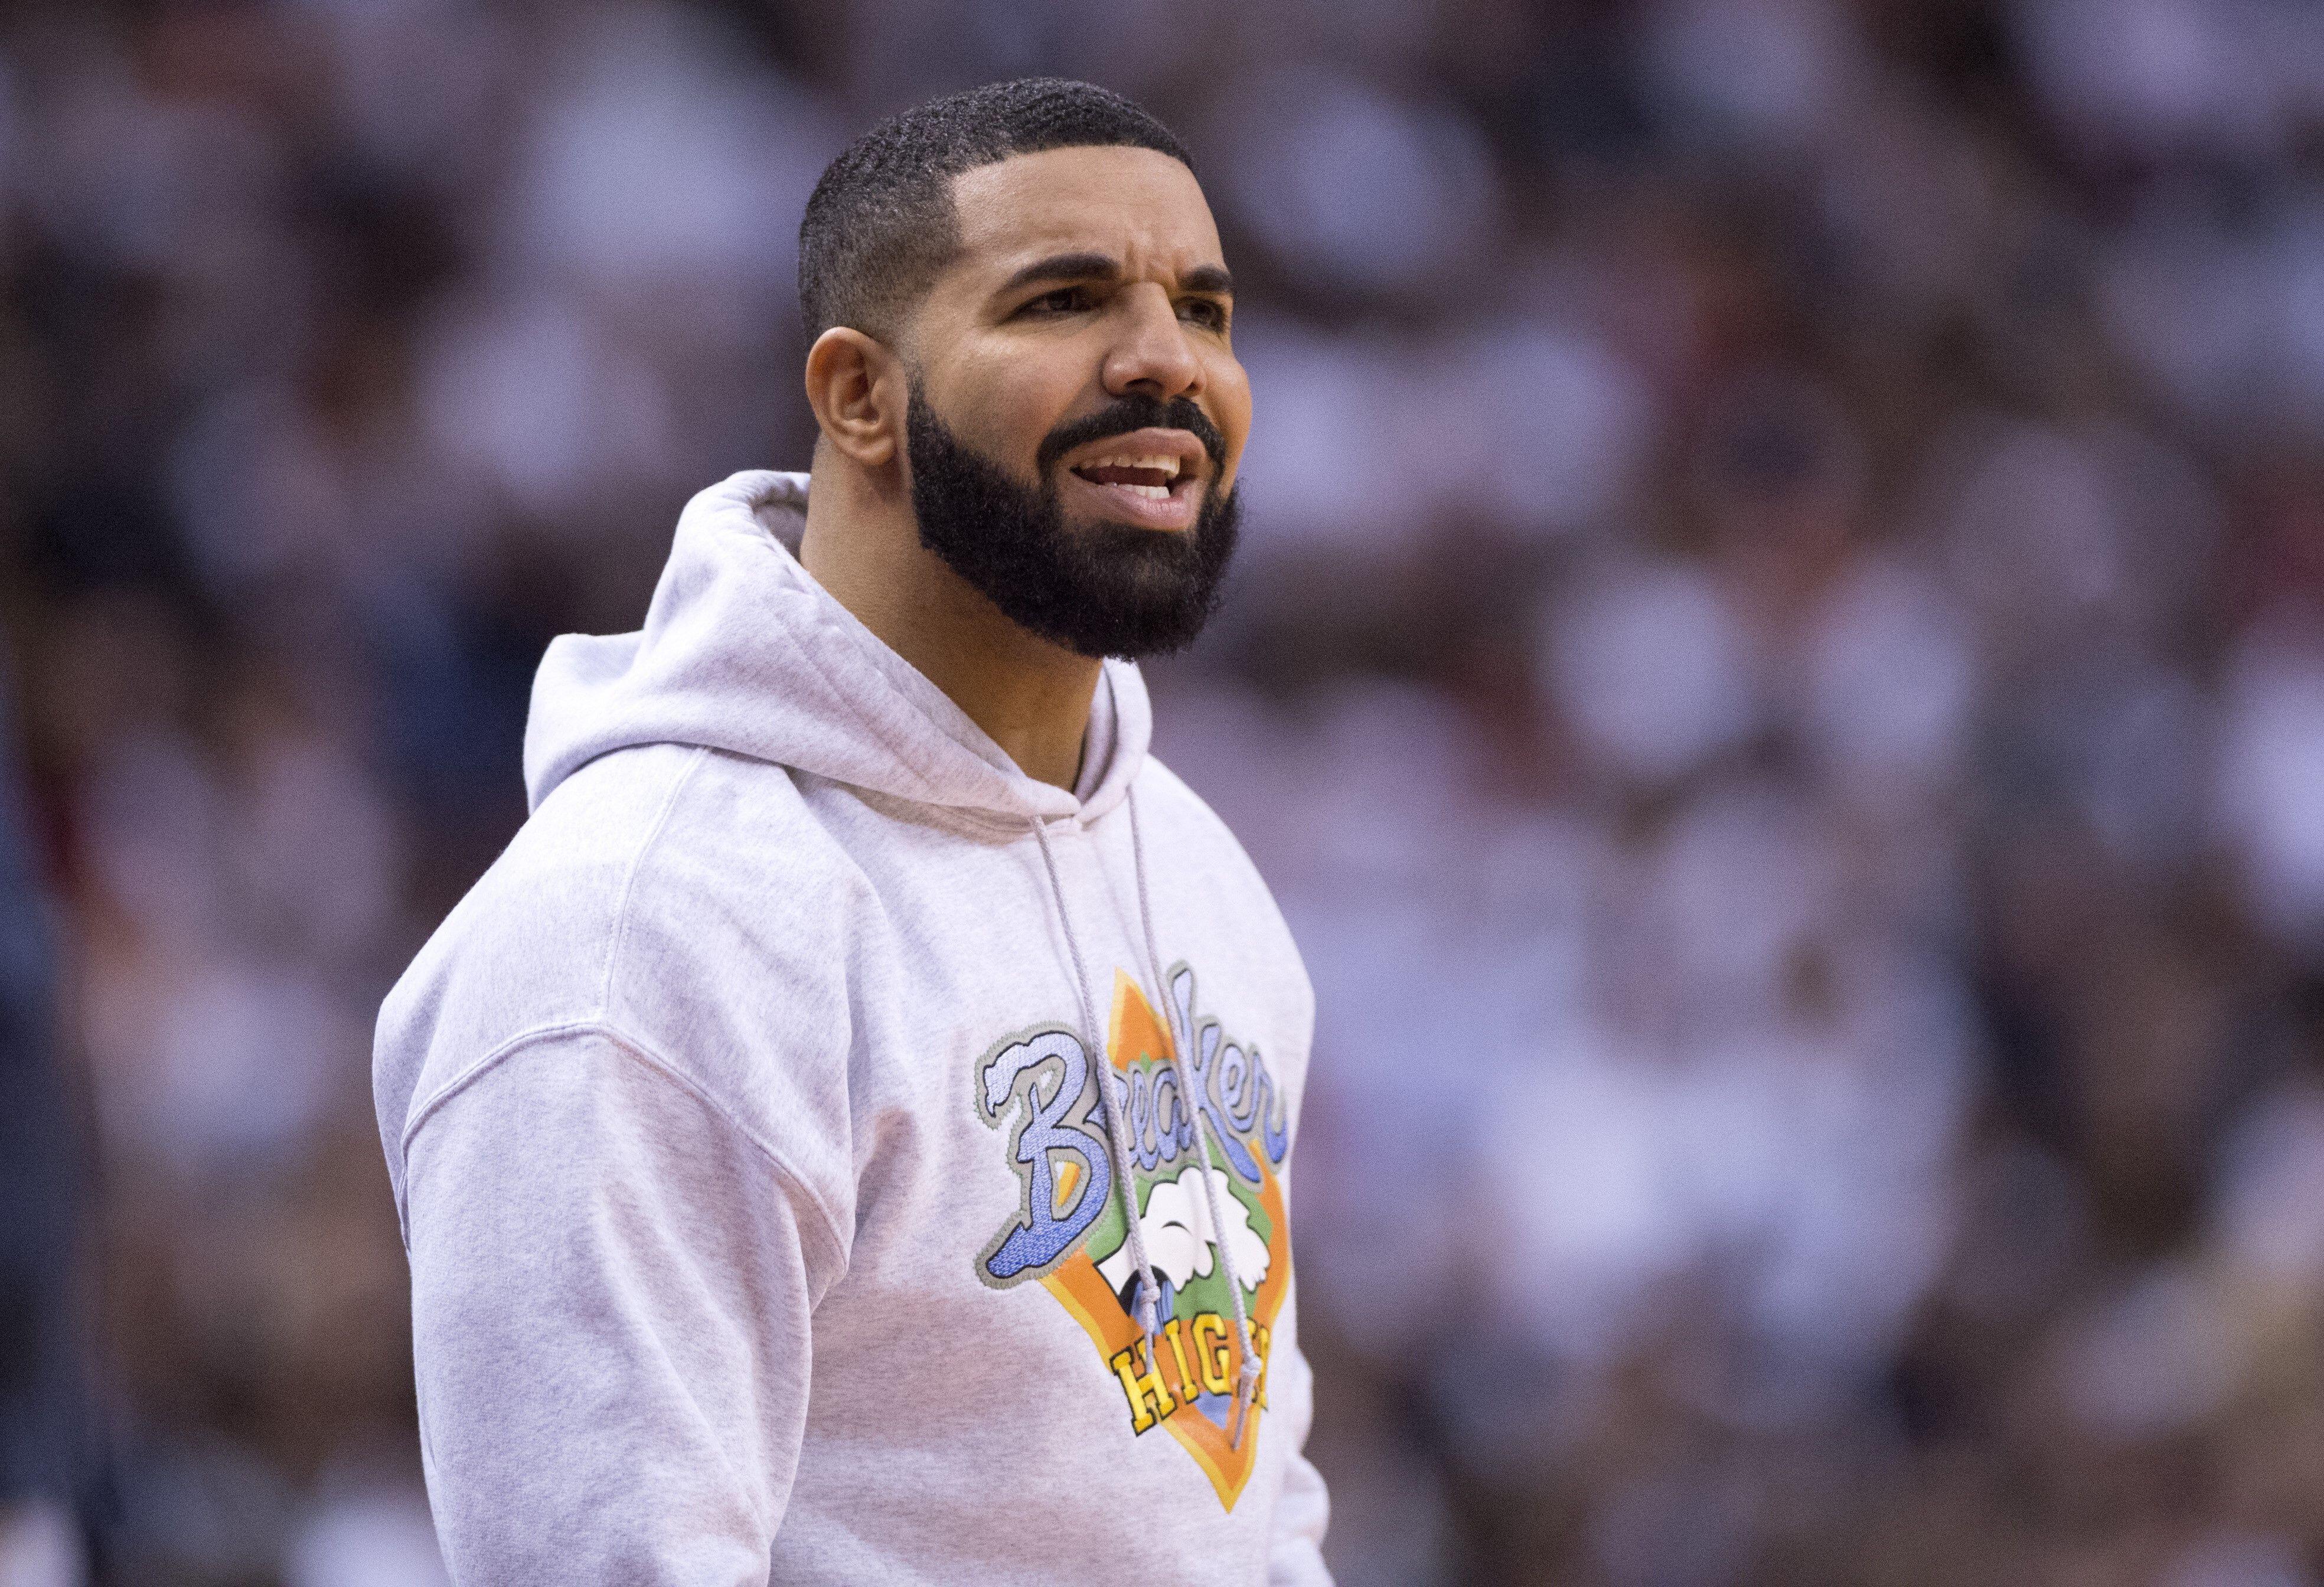 Drake says that his outfit is worth $10 million